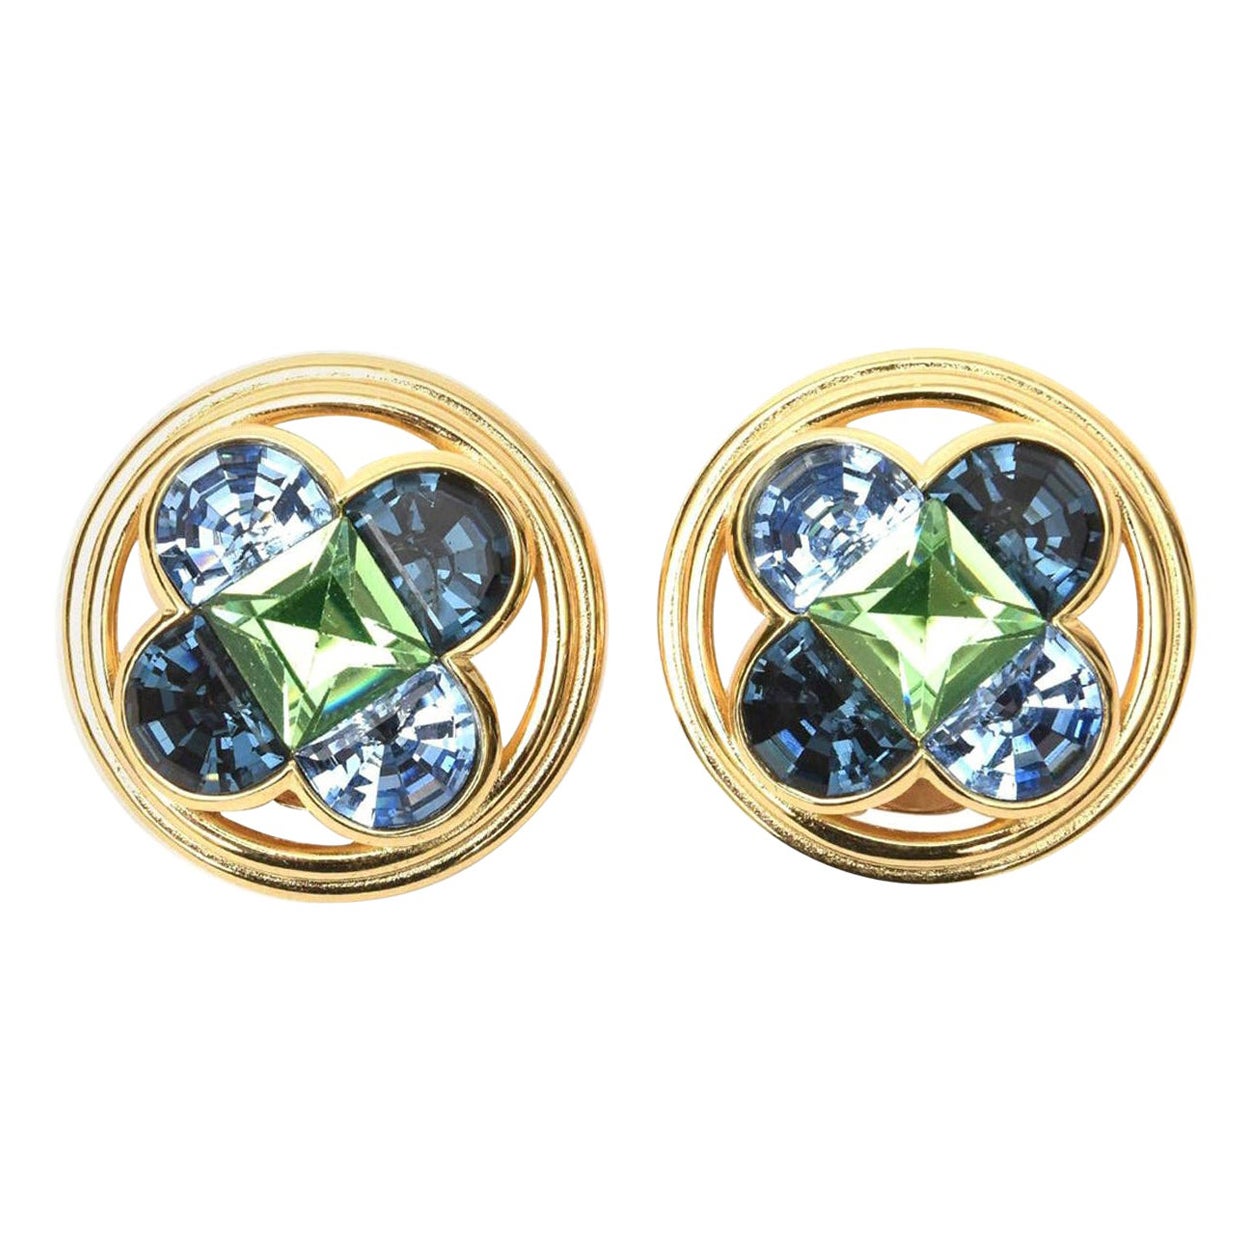 Christian Dior Vintage Blue and Green Clip On Earrings 